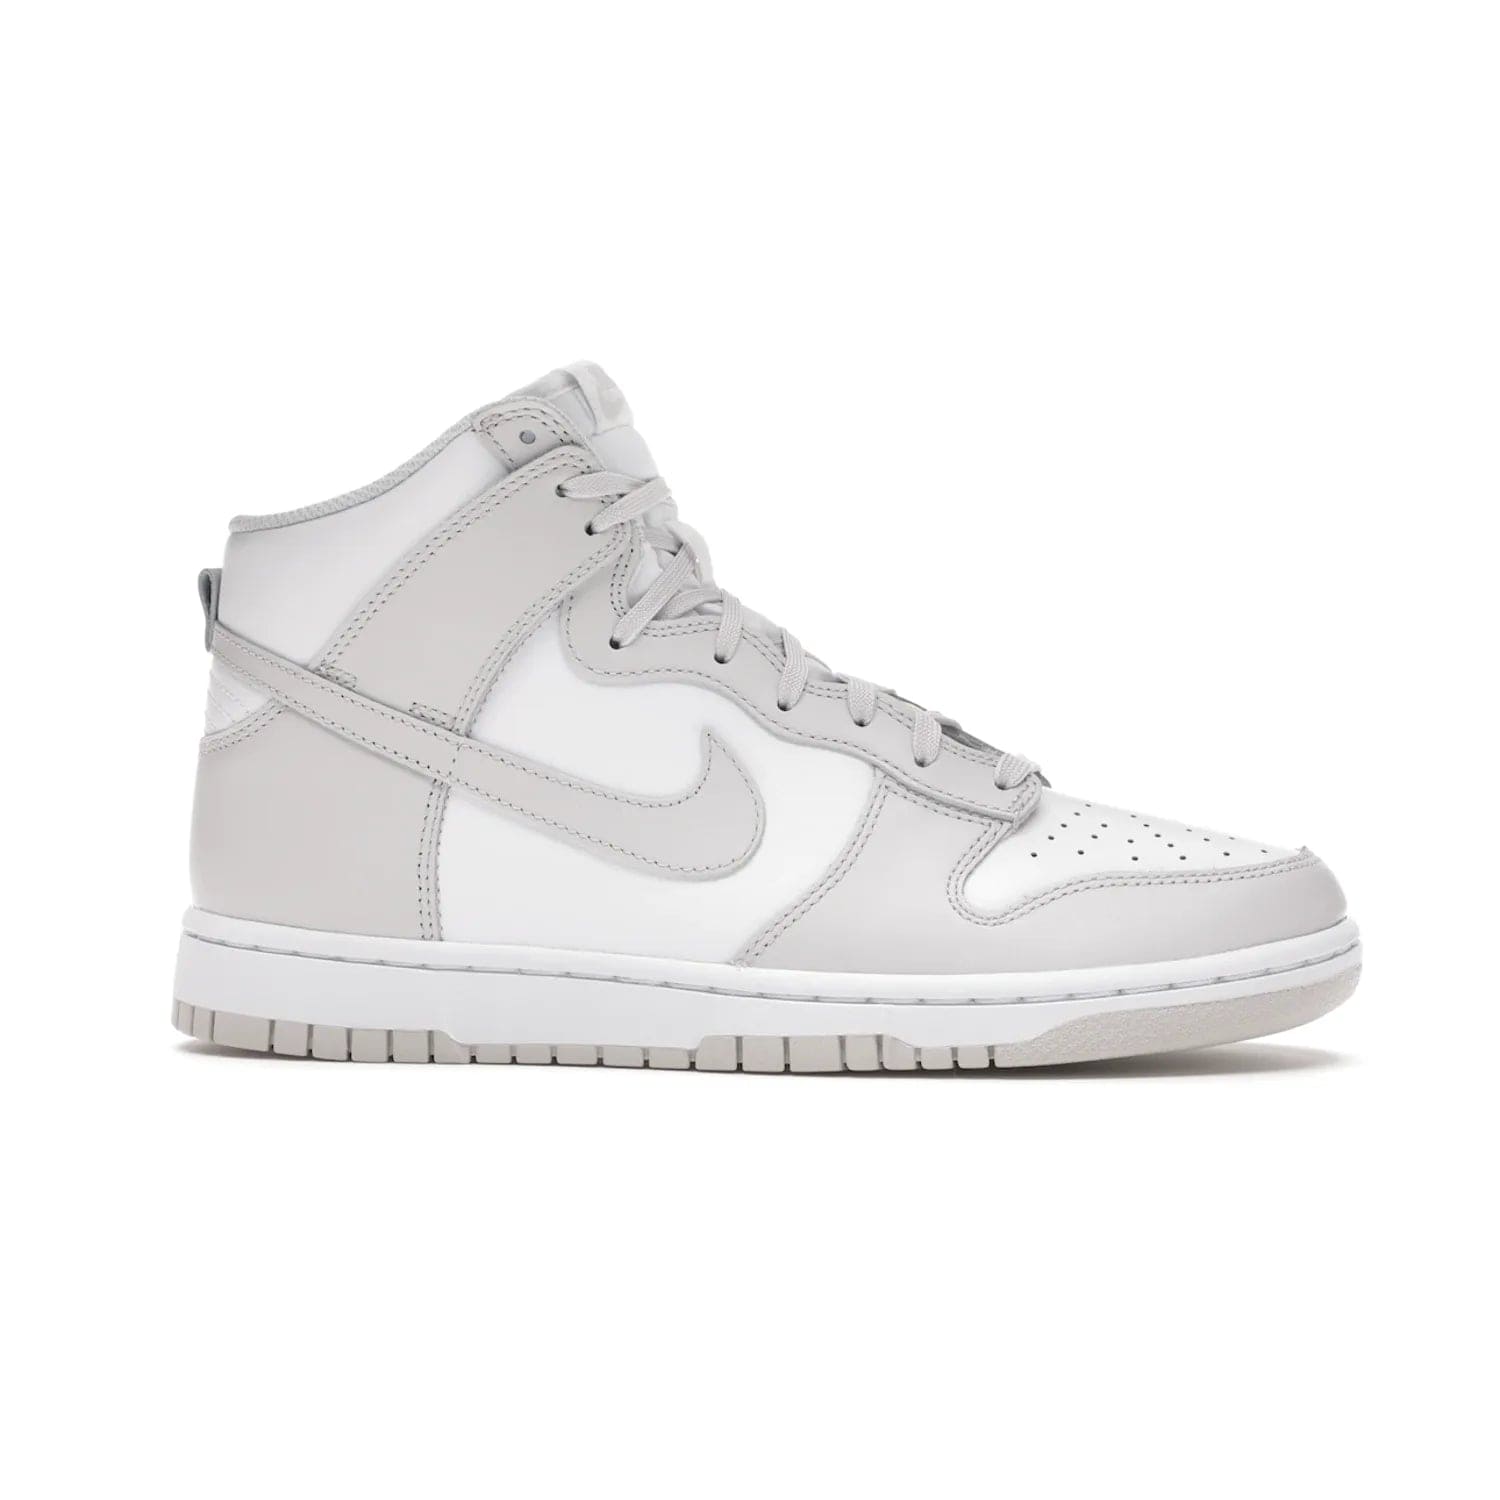 Nike Dunk High Retro White Vast Grey (2021) - Image 2 - Only at www.BallersClubKickz.com - Nike Dunk High Retro White Vast Grey 2021: classic '80s basketball sneaker with a crisp white base, grey overlays, midsole tooling and outsole. Dropped Feb. 2021.